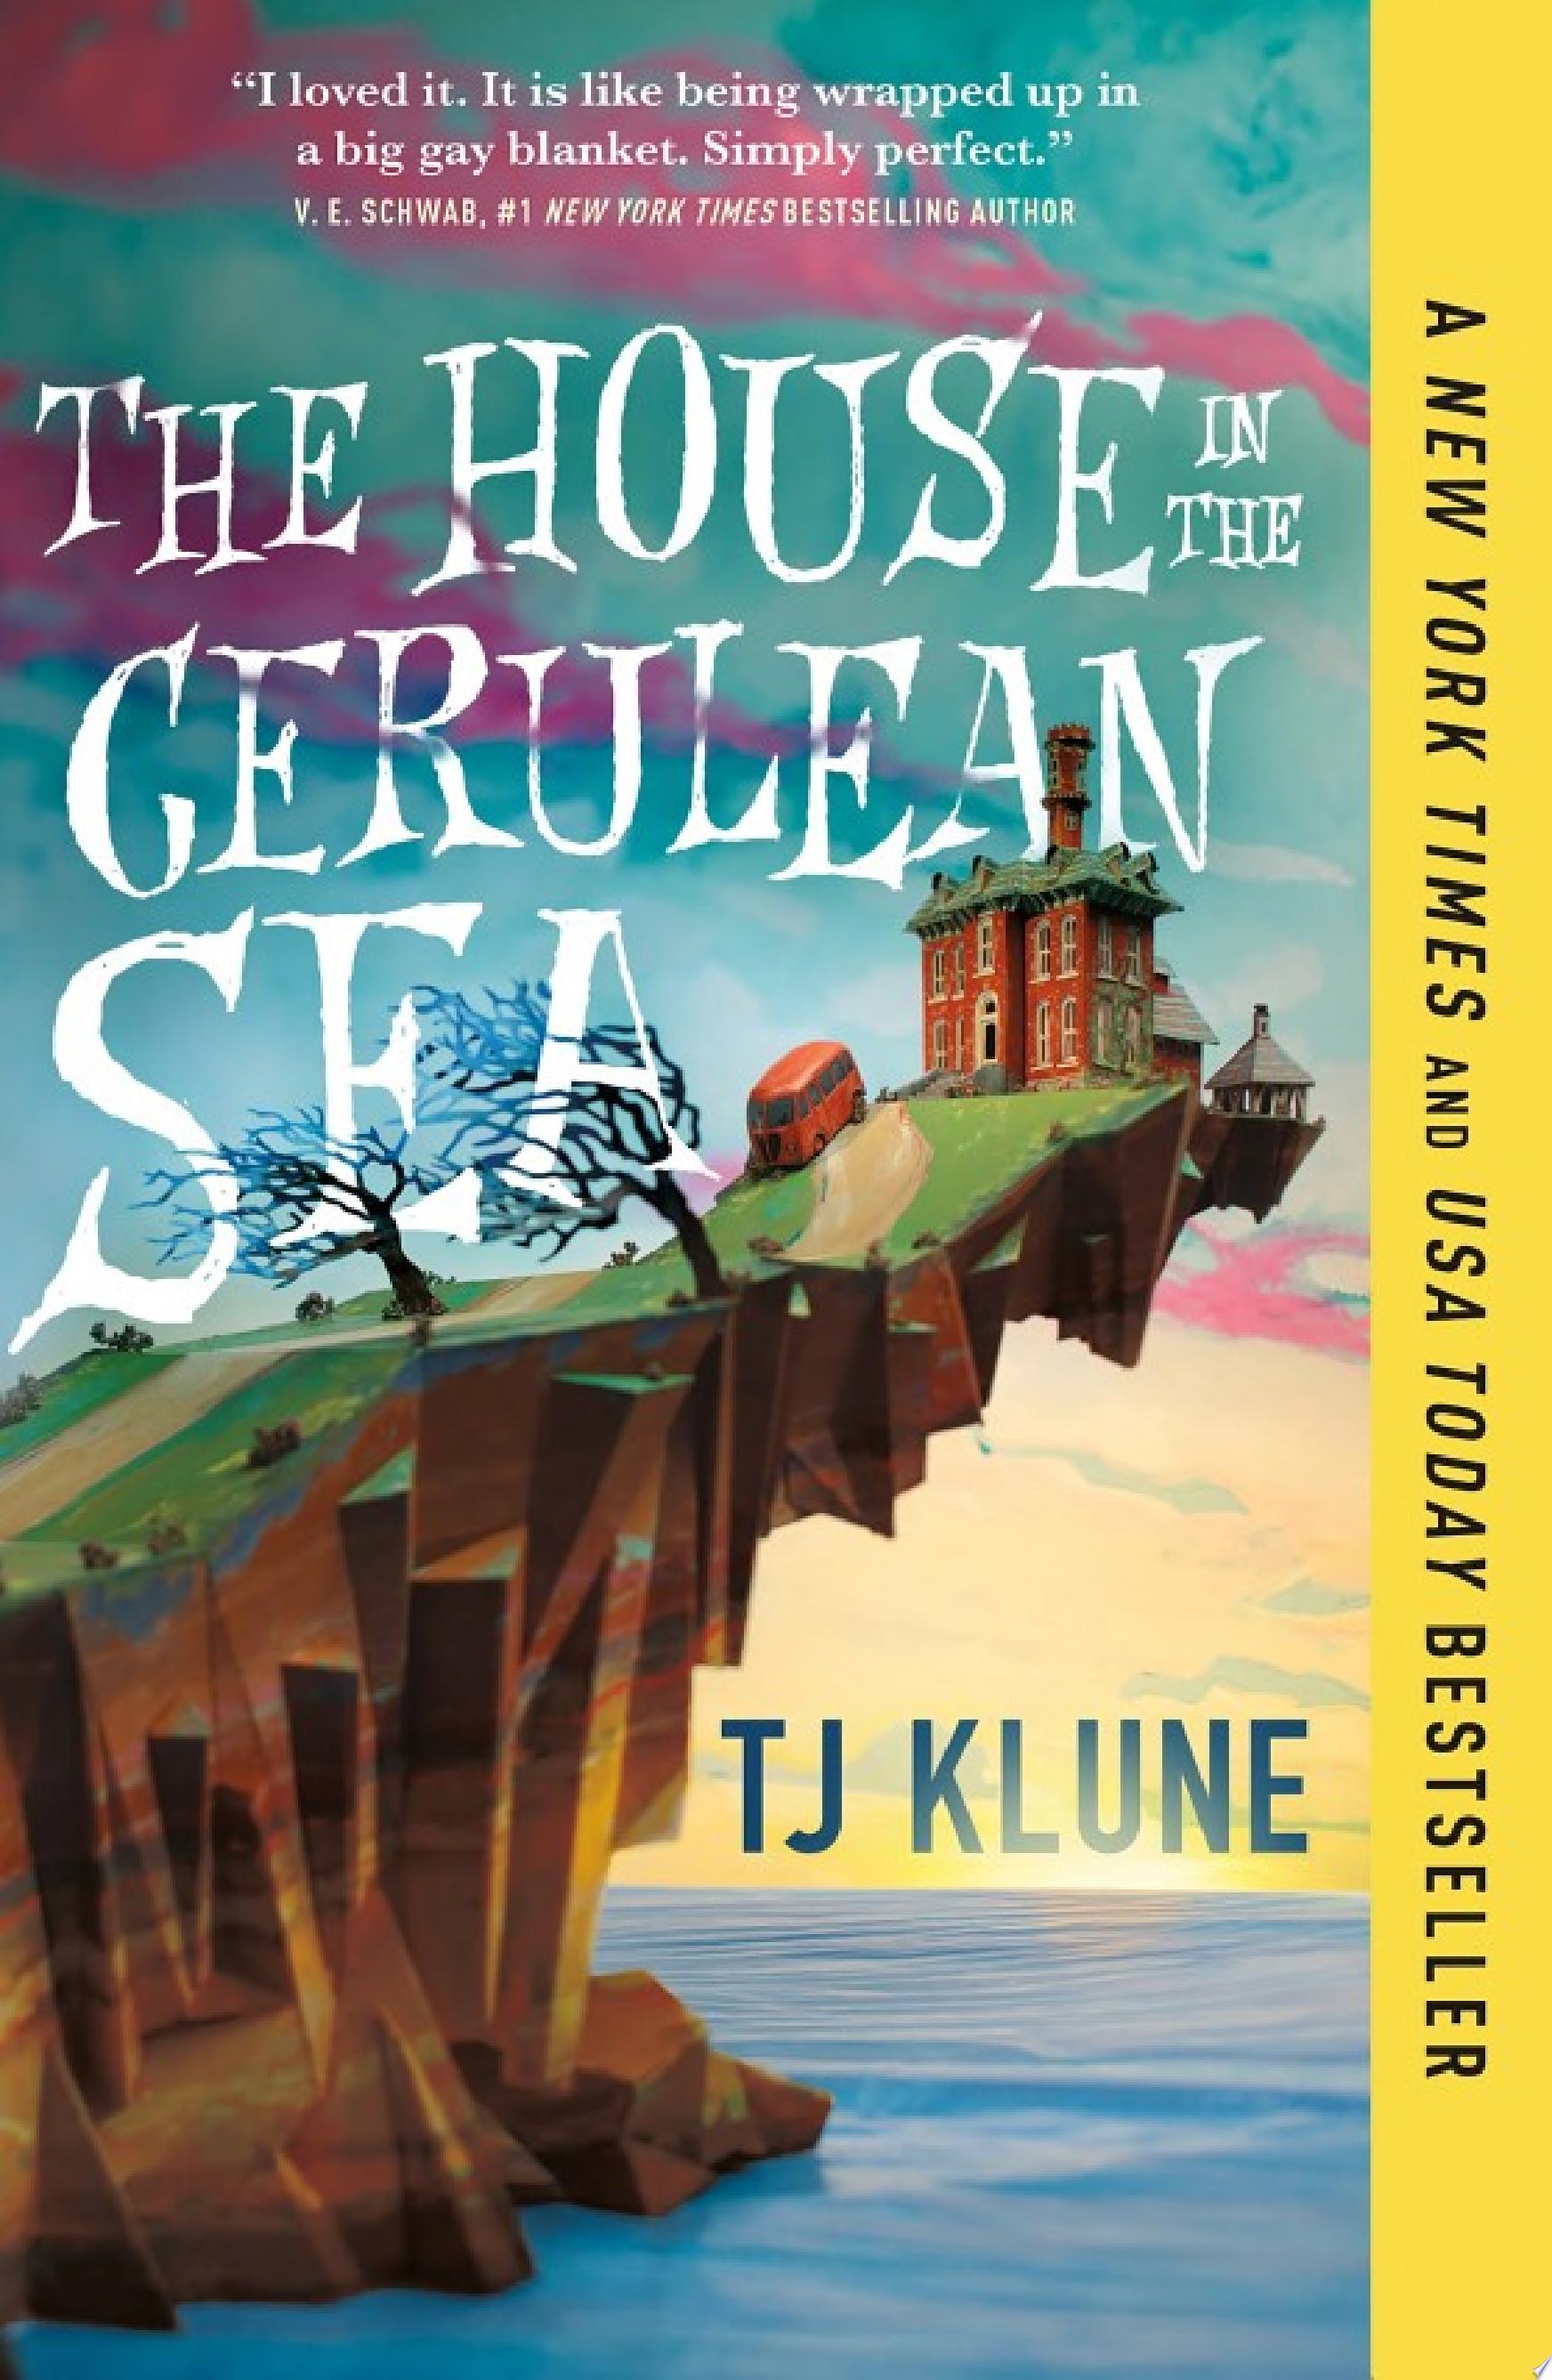 Image for "The House in the Cerulean Sea"